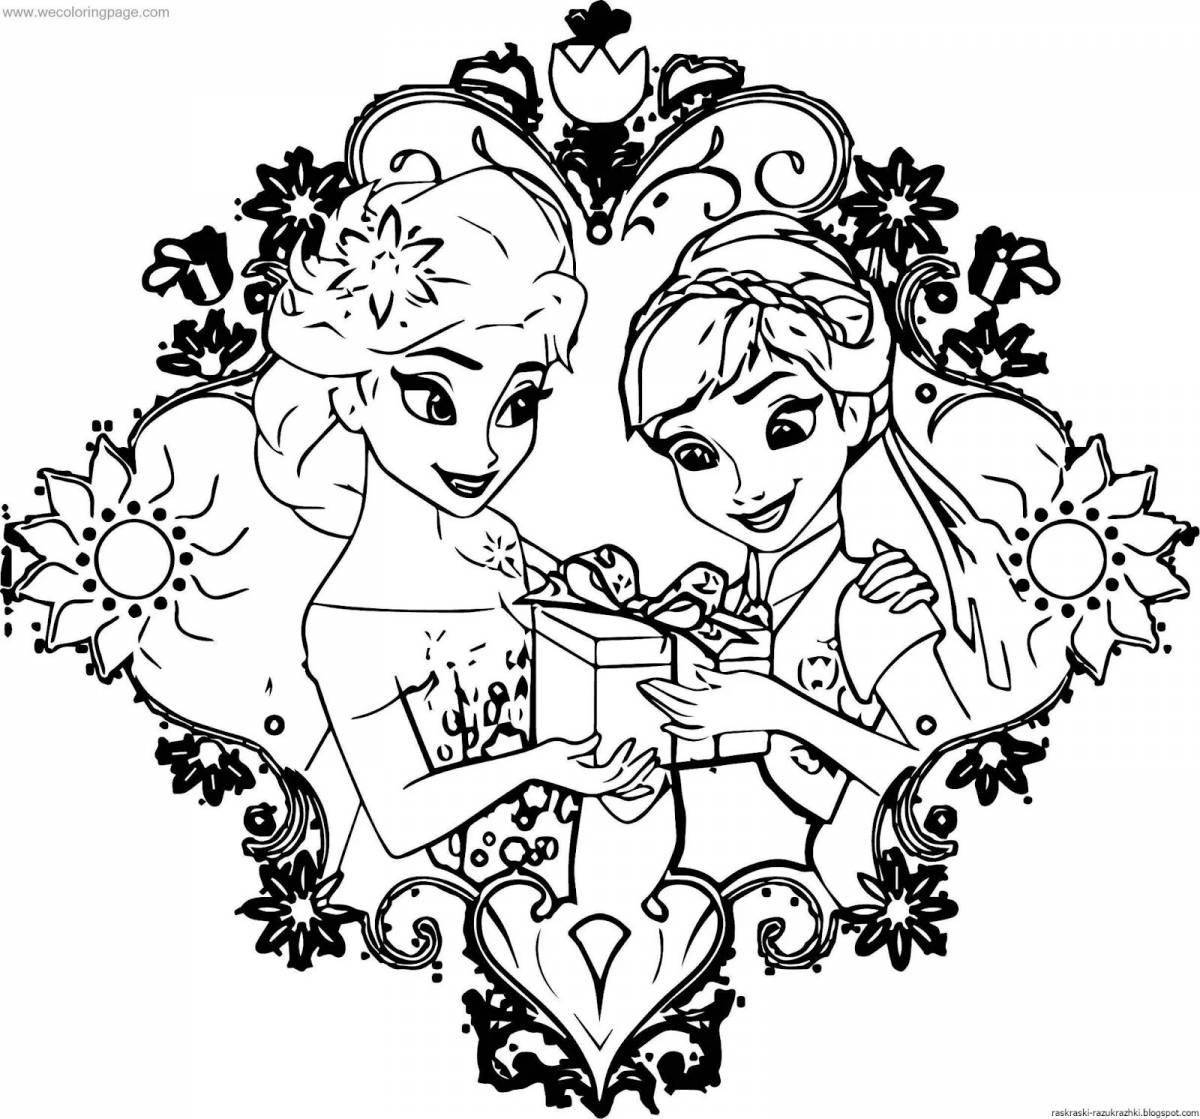 Violent coloring page 2 for girls